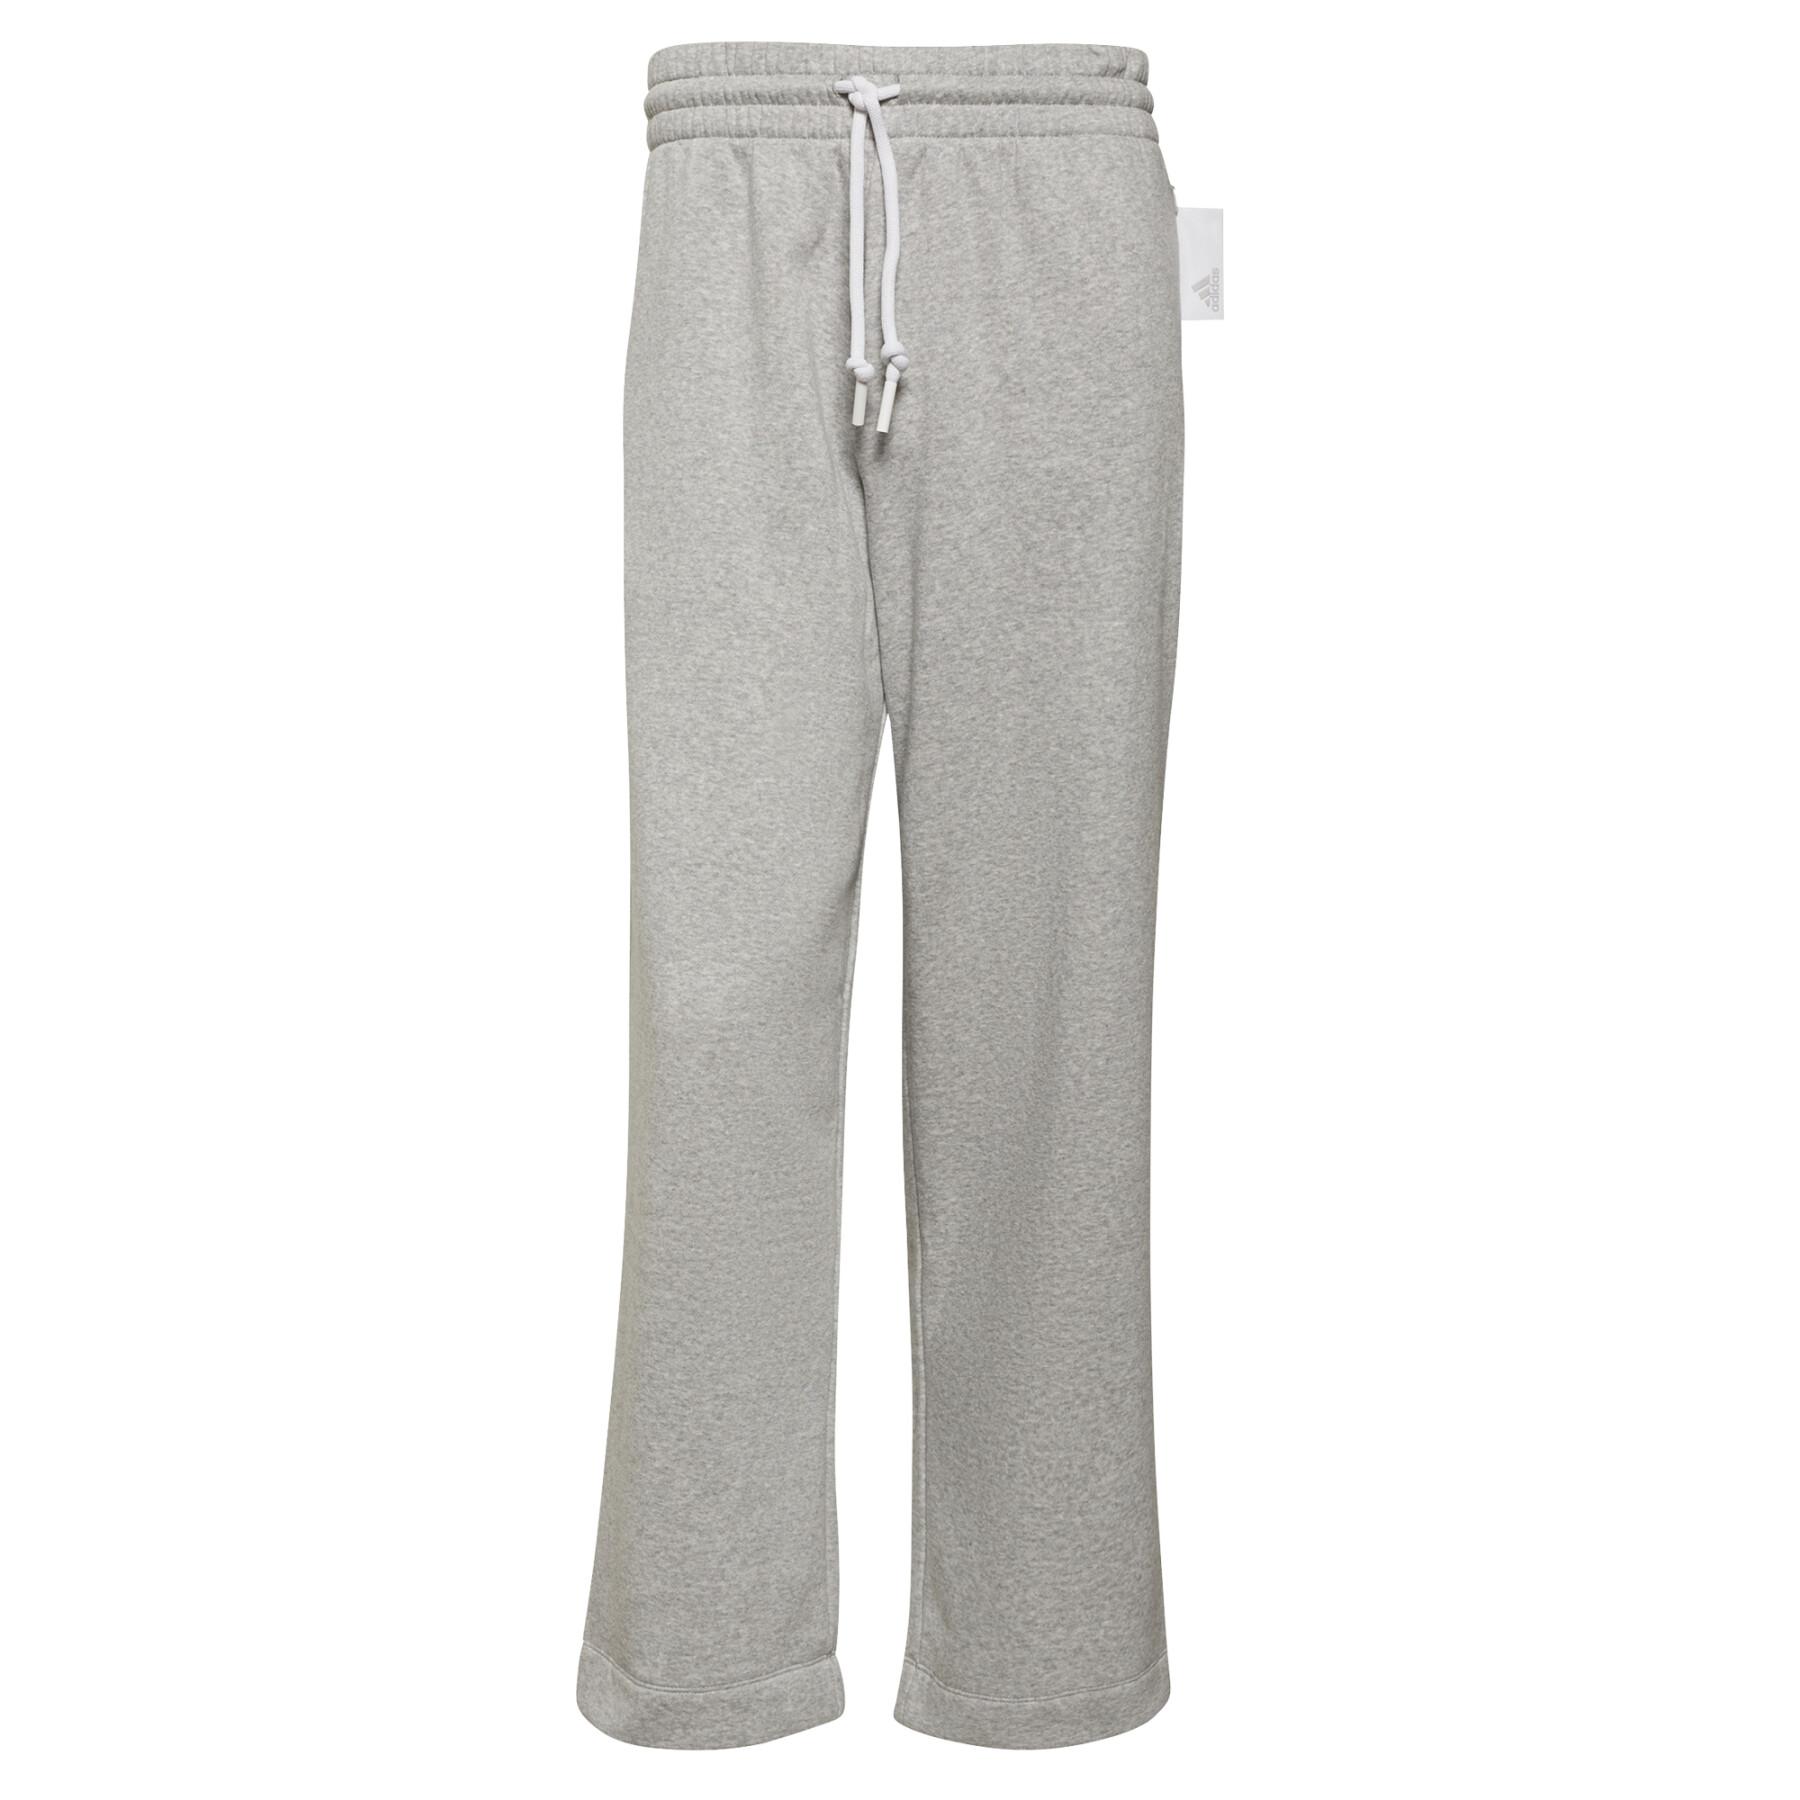 Pants adidas Sportswear Comfy and Chill Fleece